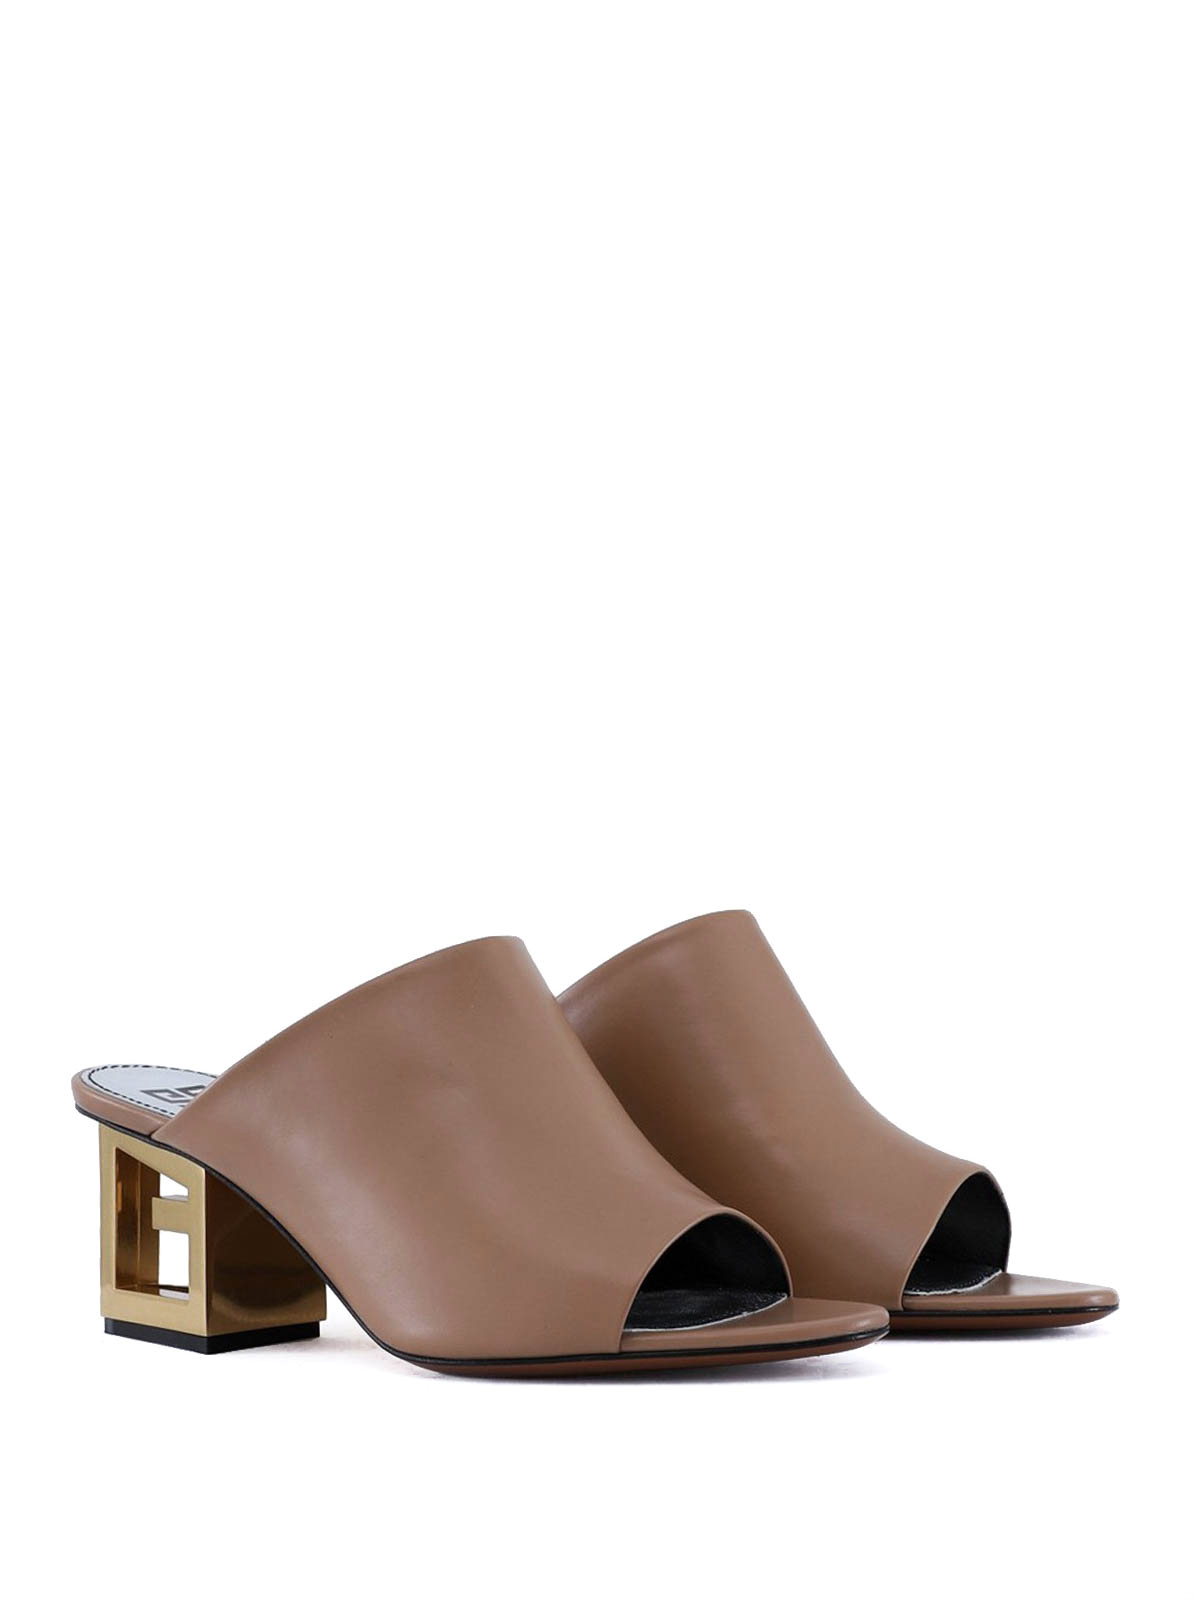 Givenchy - Triangle leather sandals 